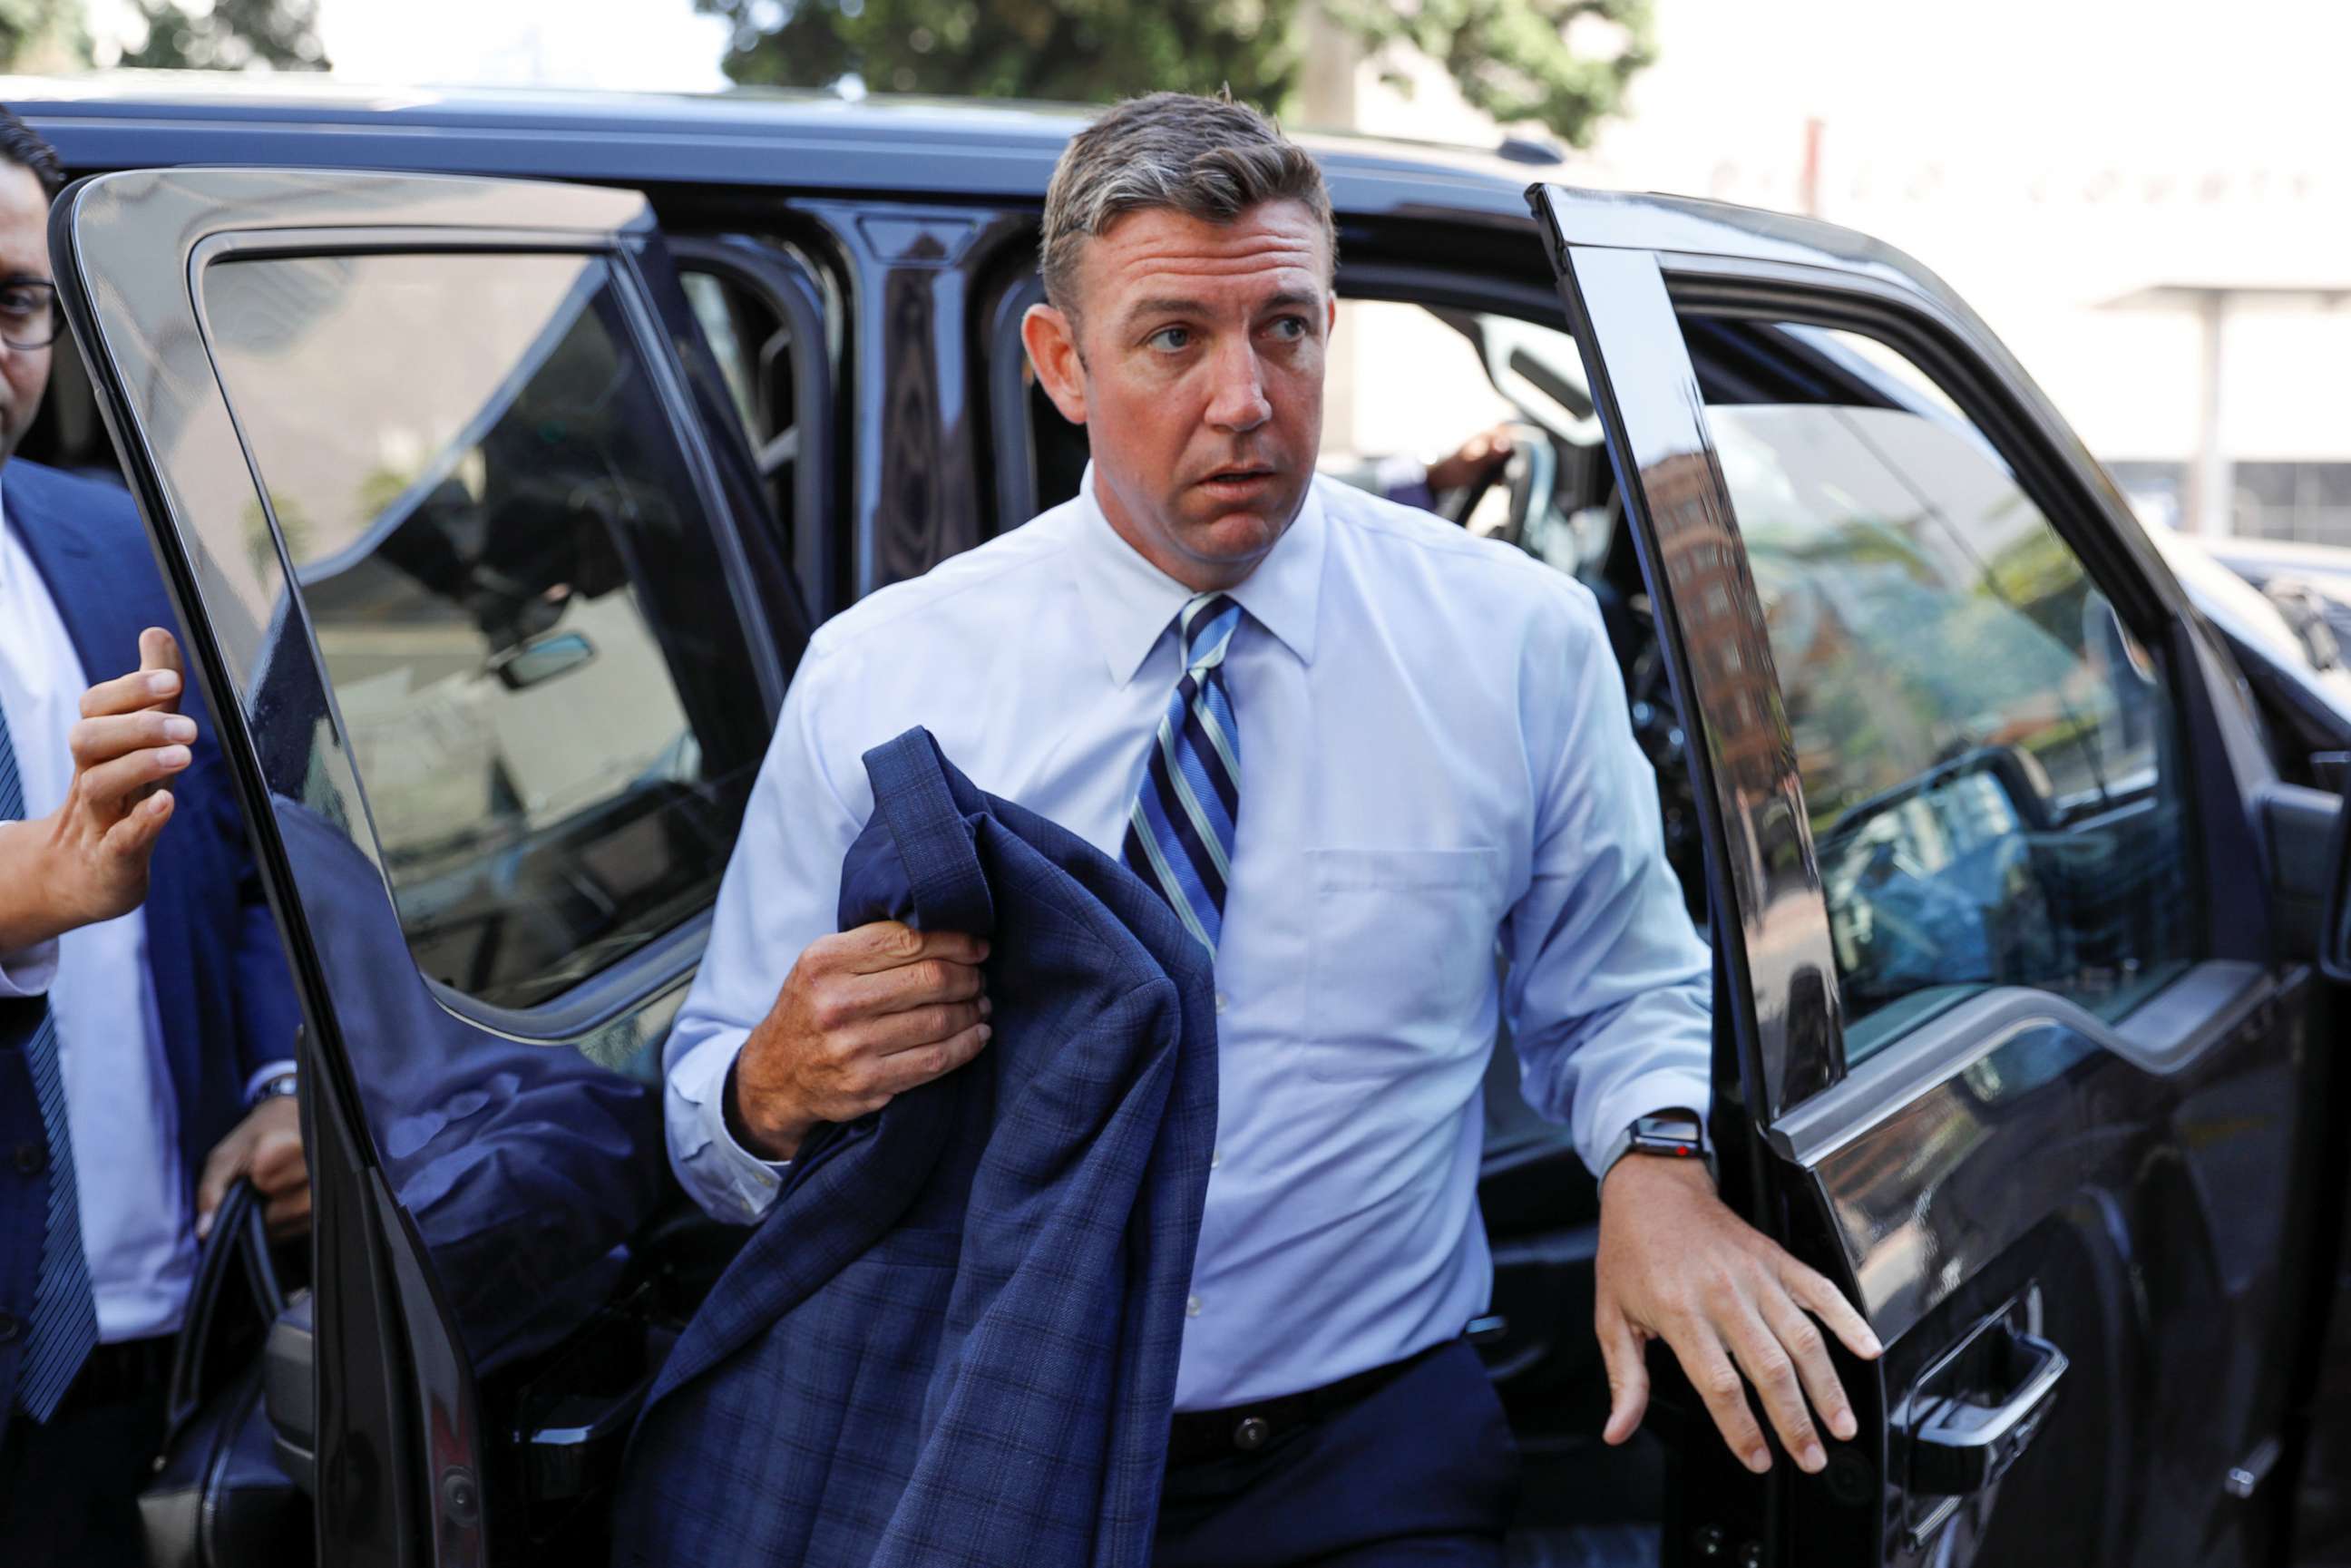 PHOTO: Rep. Duncan Hunter arrives for his arraignment at federal court in San Diego, Calif., Aug. 23, 2018.